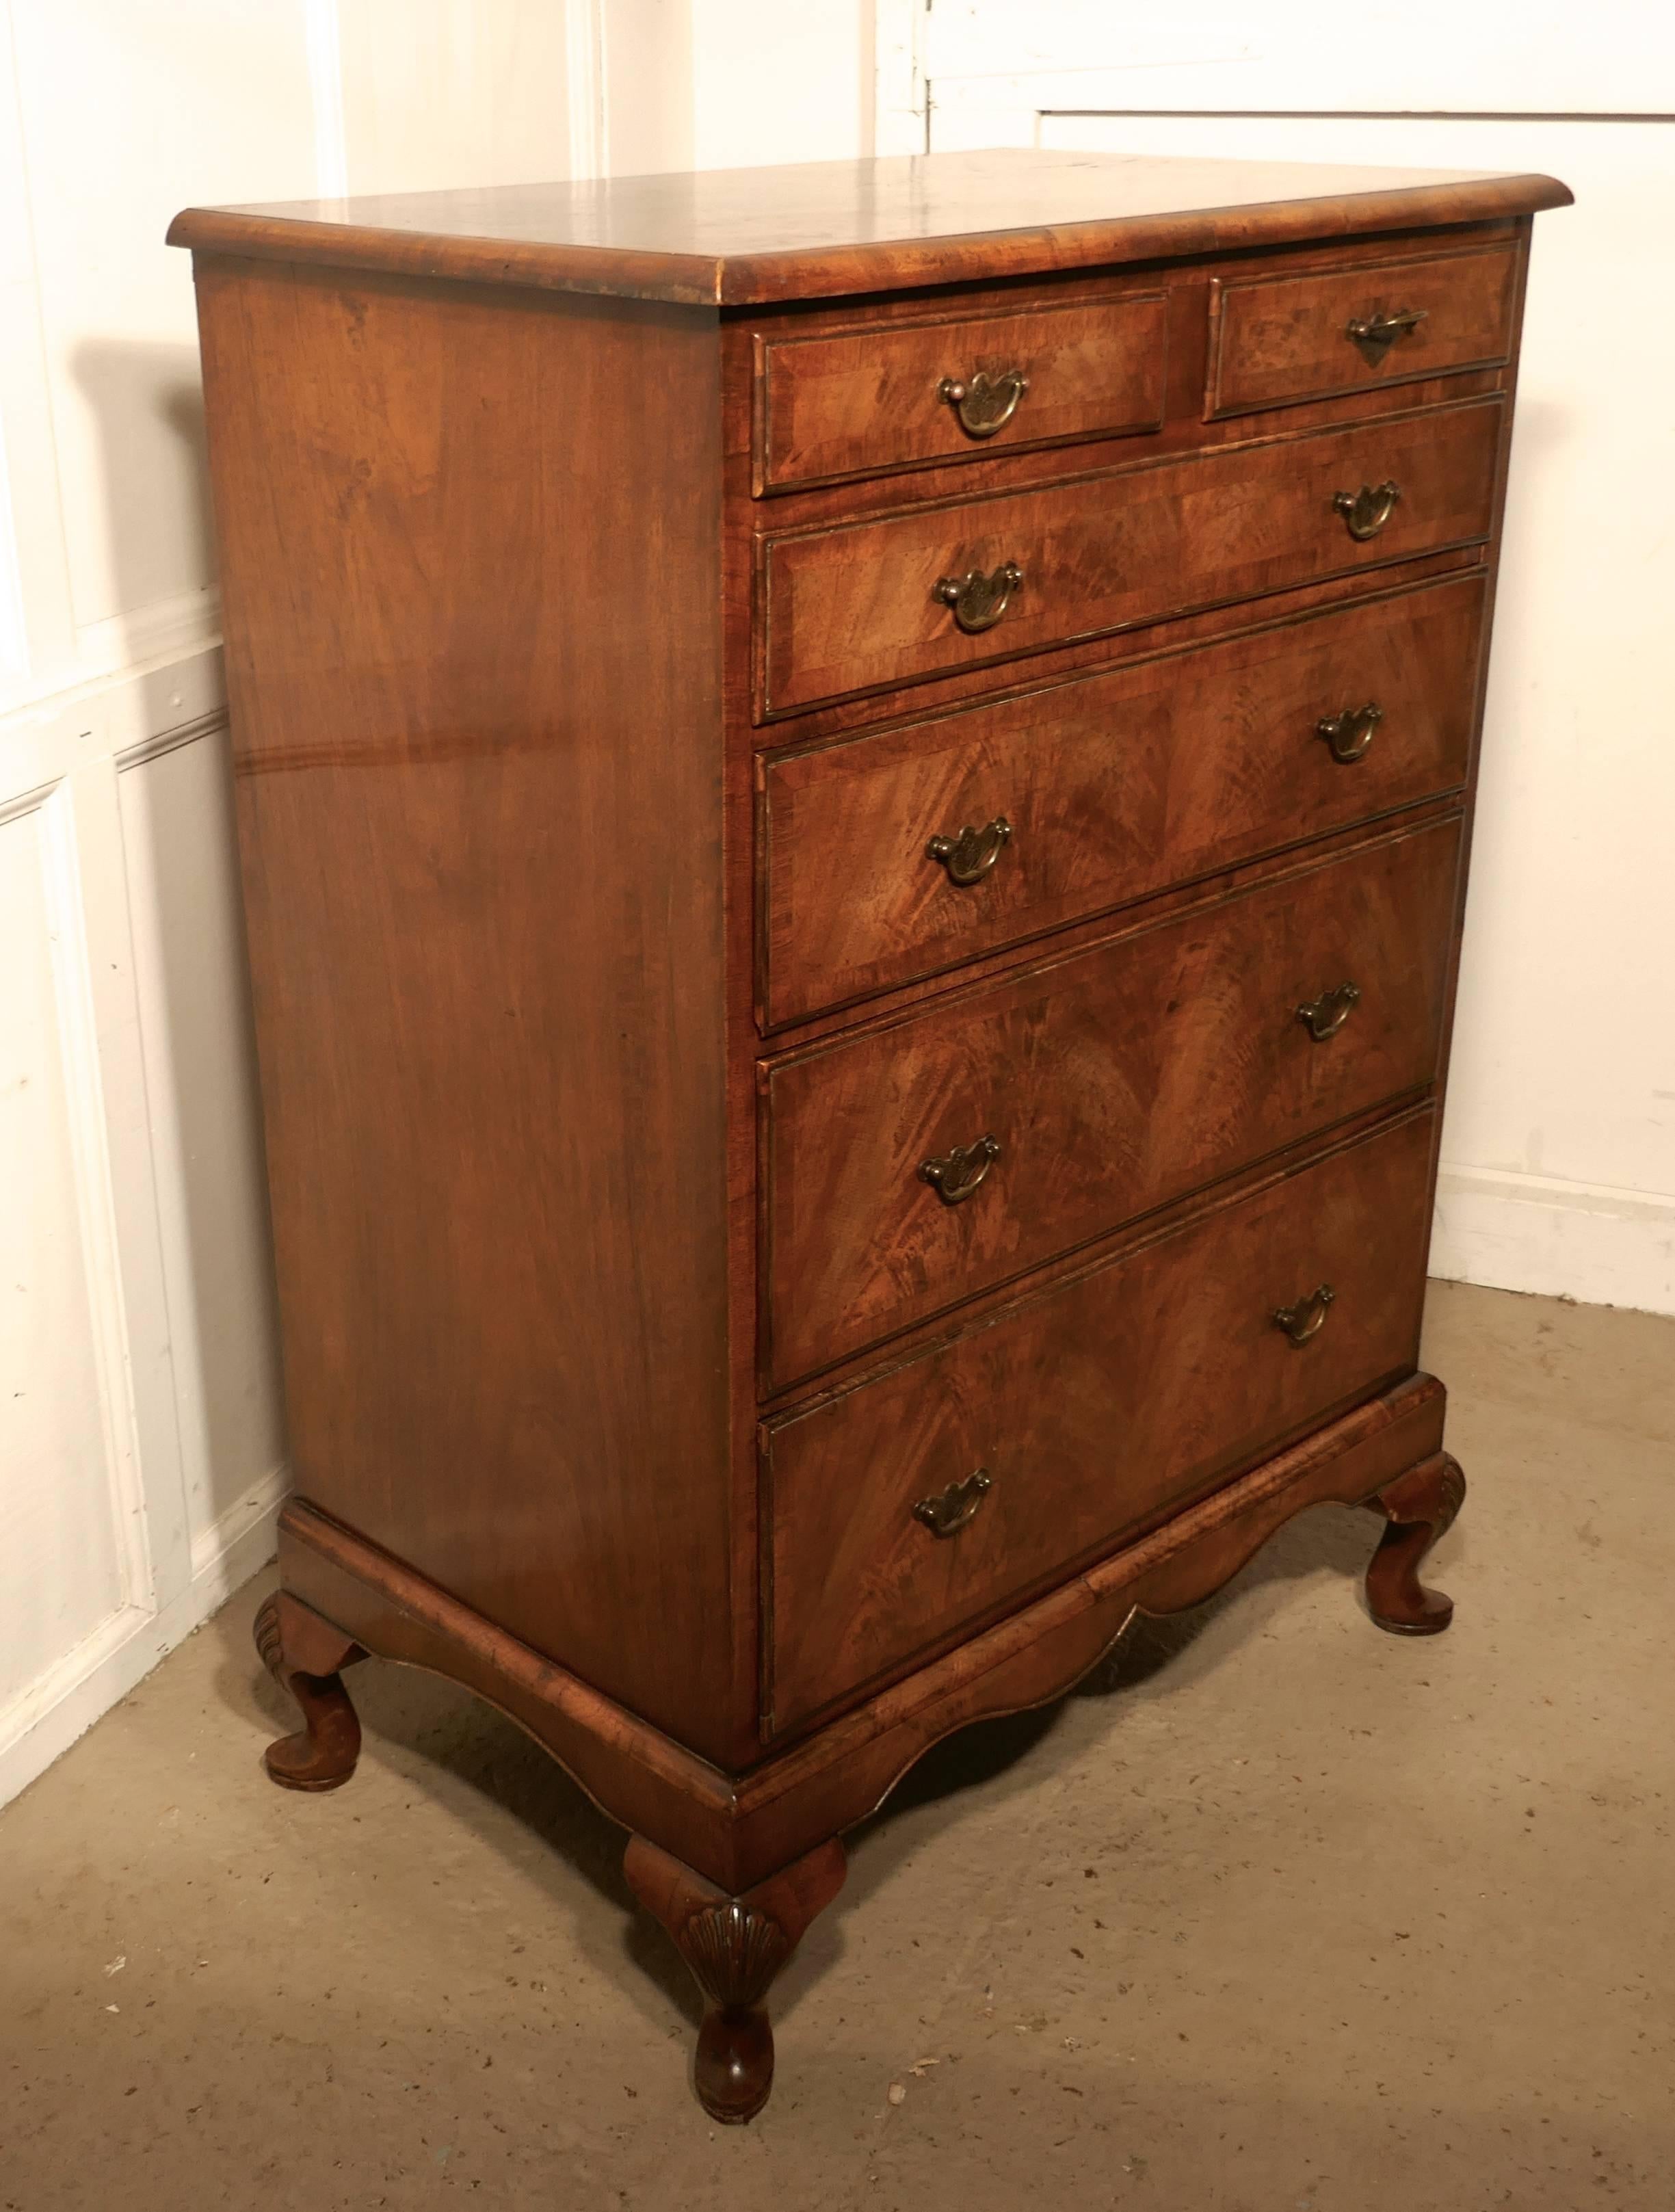 This is a superb walnut chest of drawers it has the unusual and very desirable combination of two short drawers at the top and four longer graduated drawers beneath.
The drawers have brass swan neck handles with etched back plates to the handles,